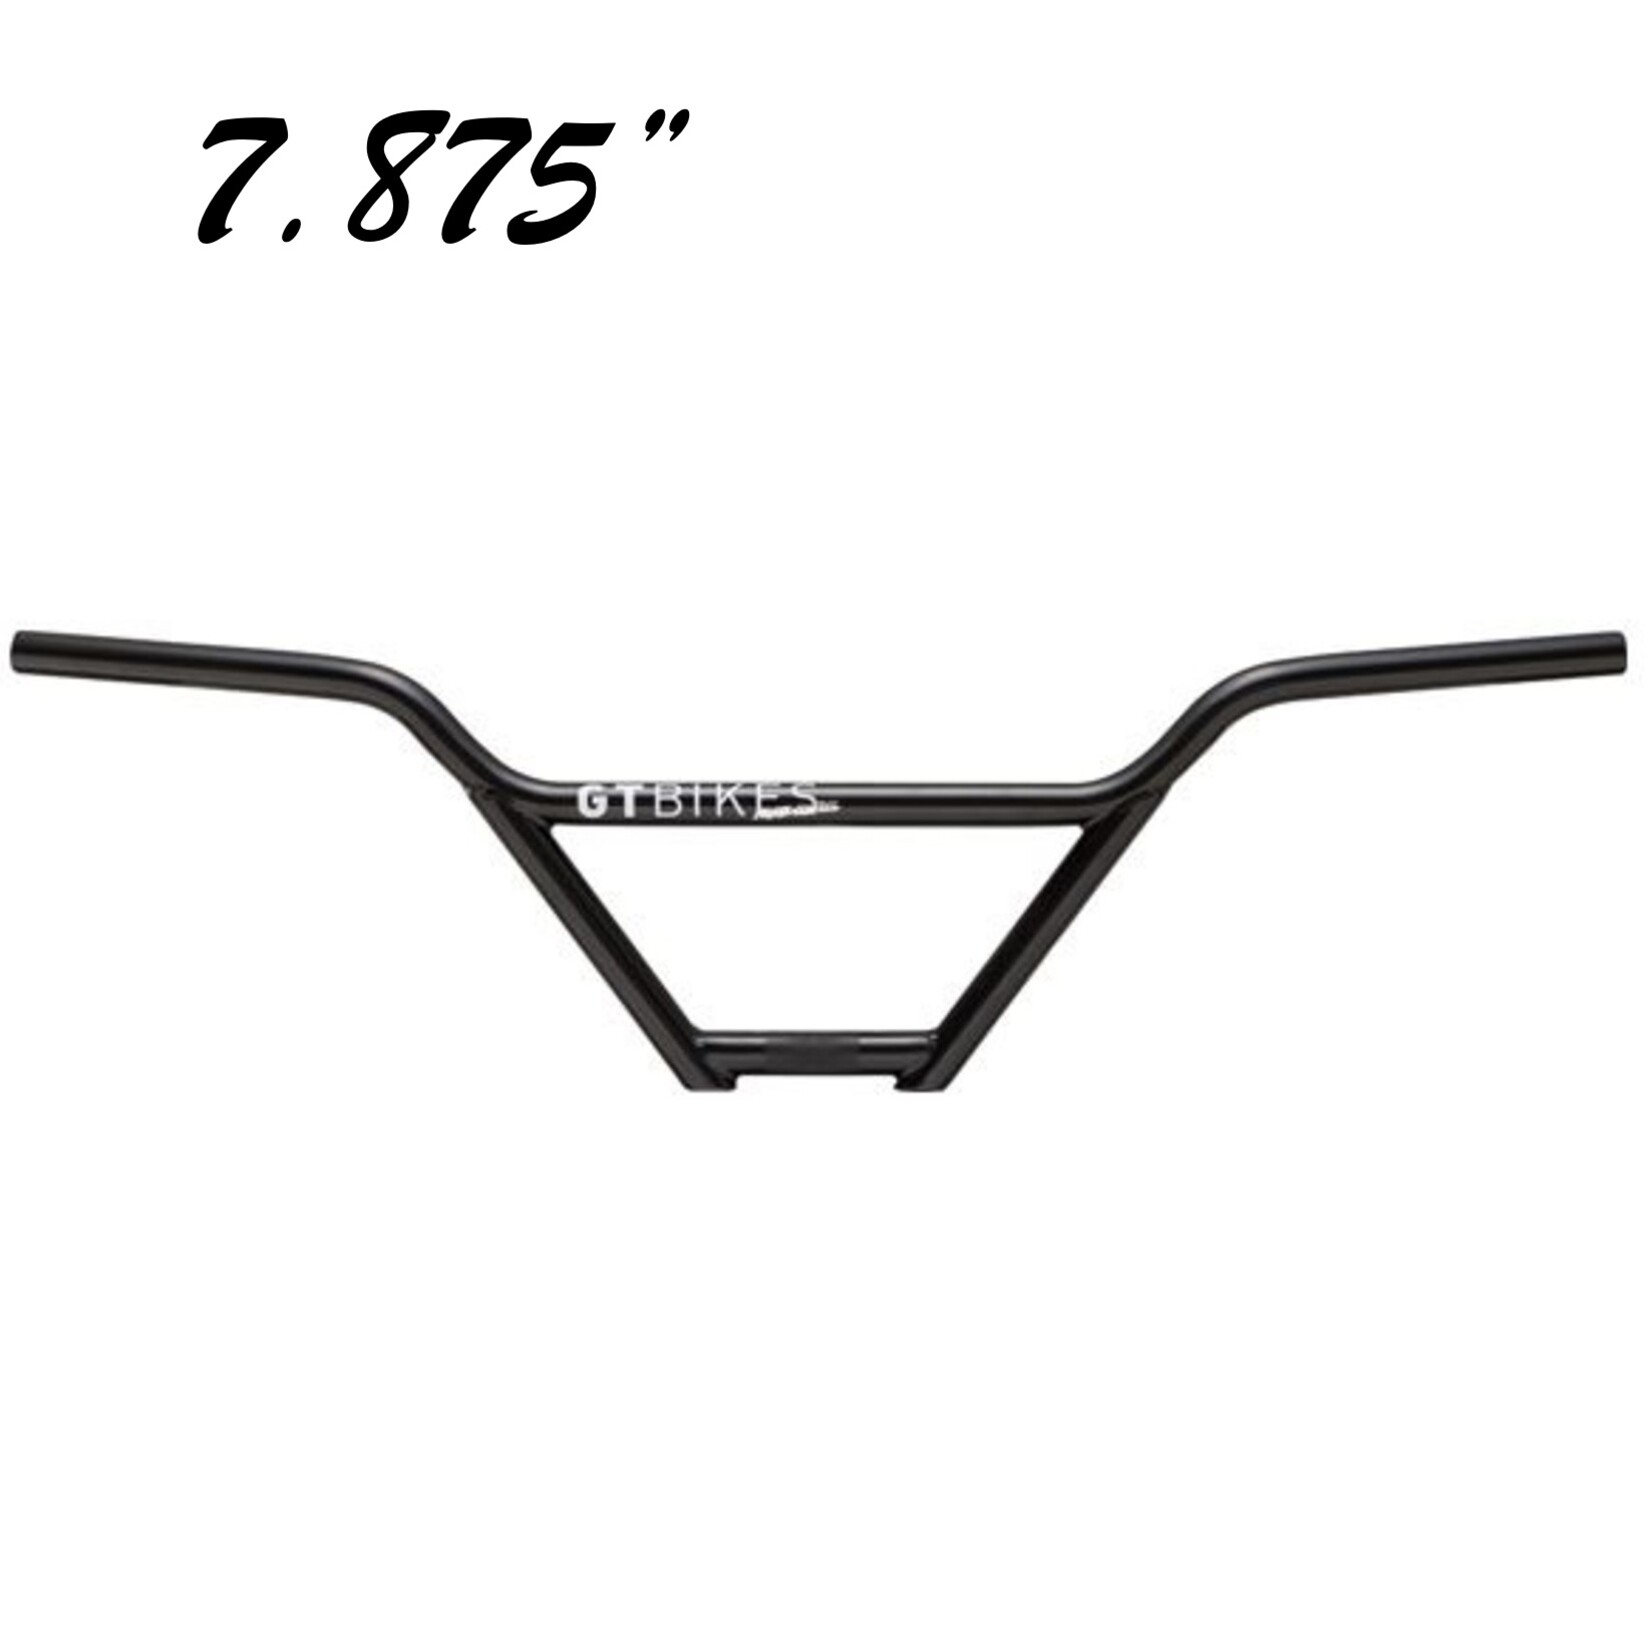 GT Bicycles GT Cruise Control  4pc Bar 7.875in